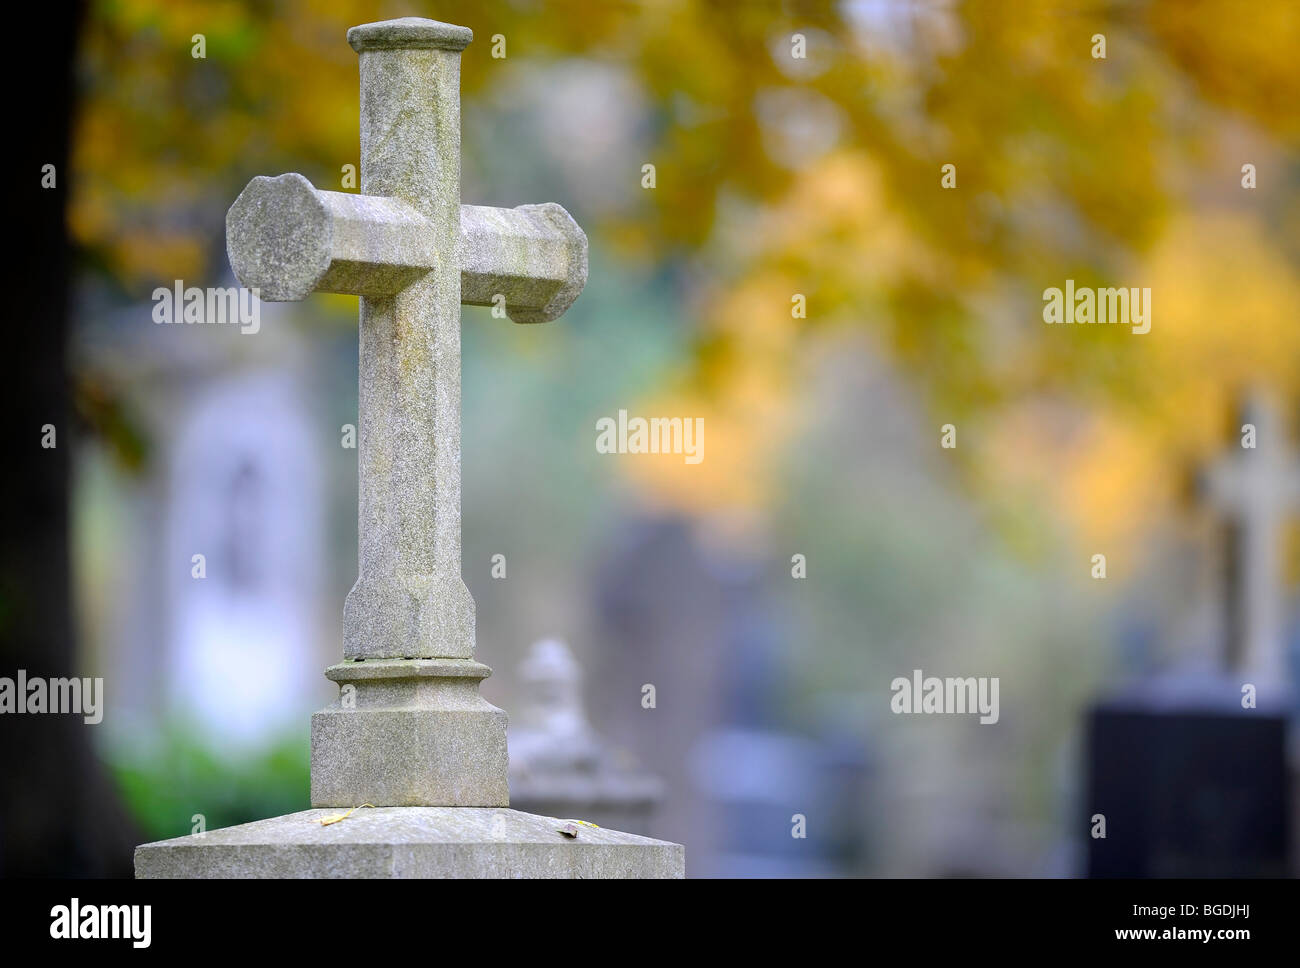 Tombstone with light-colored stone cross in front of colorful autumn leaves, Munich, Bavaria, Germany, Europe Stock Photo